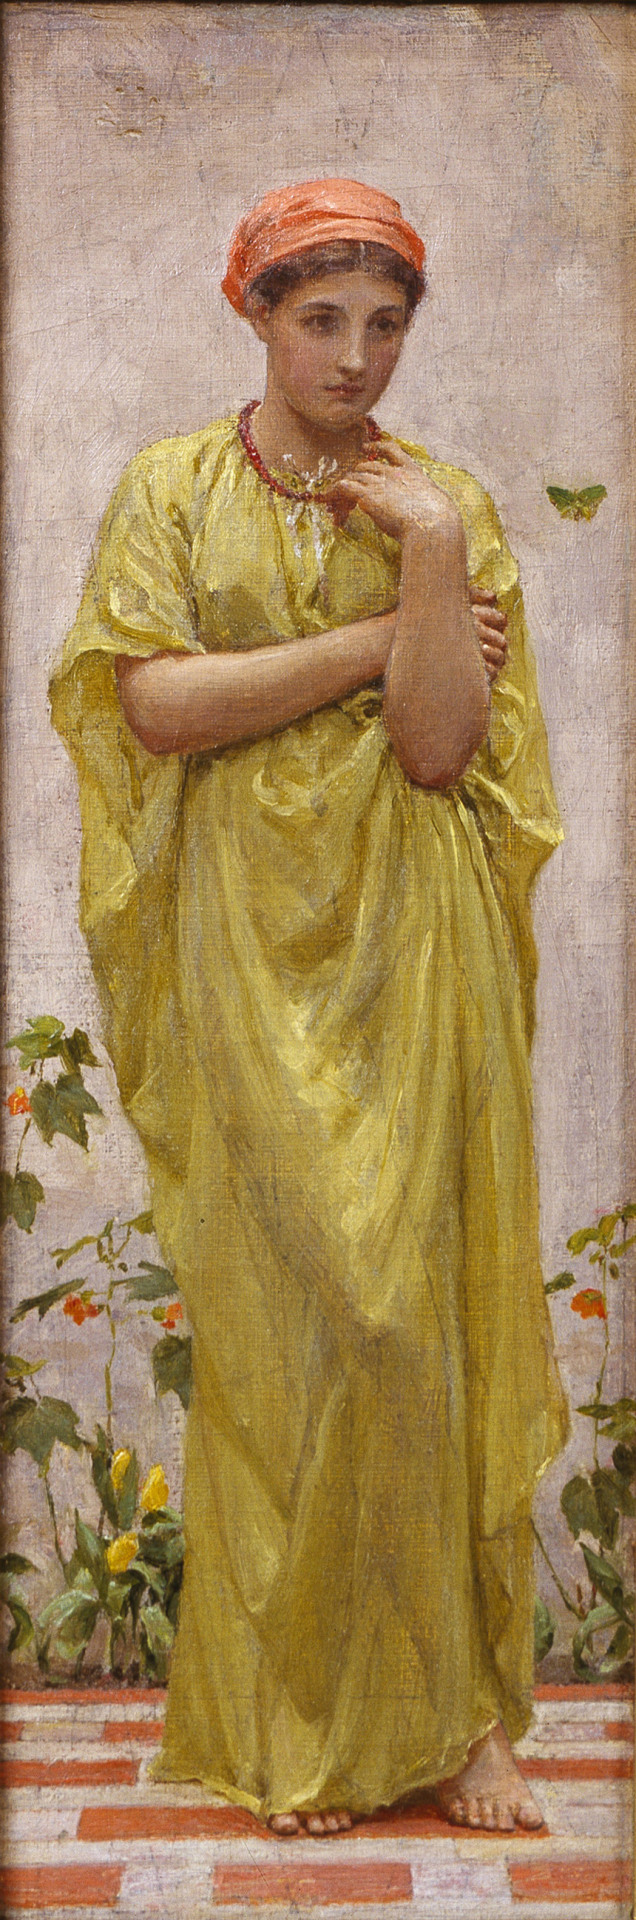 A Study in Yellow by Albert Joseph Moore, 1880